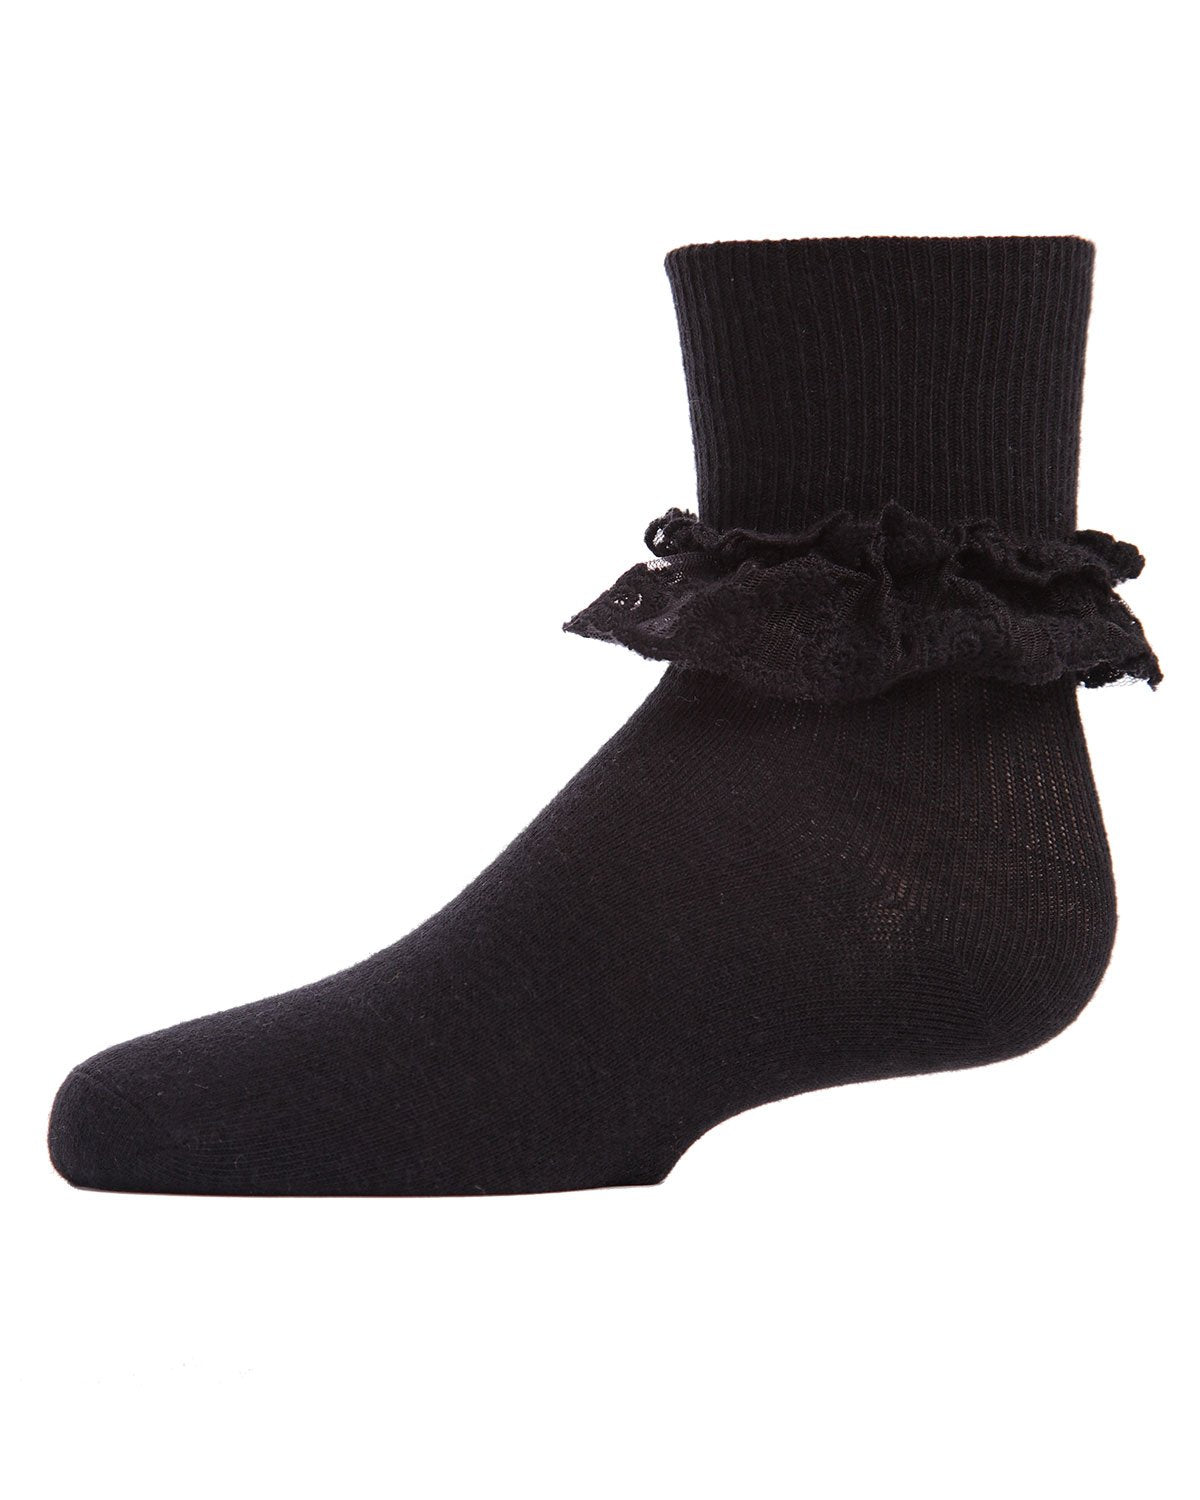 Double Dare Girls Dual-Layer Lace Cotton Blend Anklet Socks